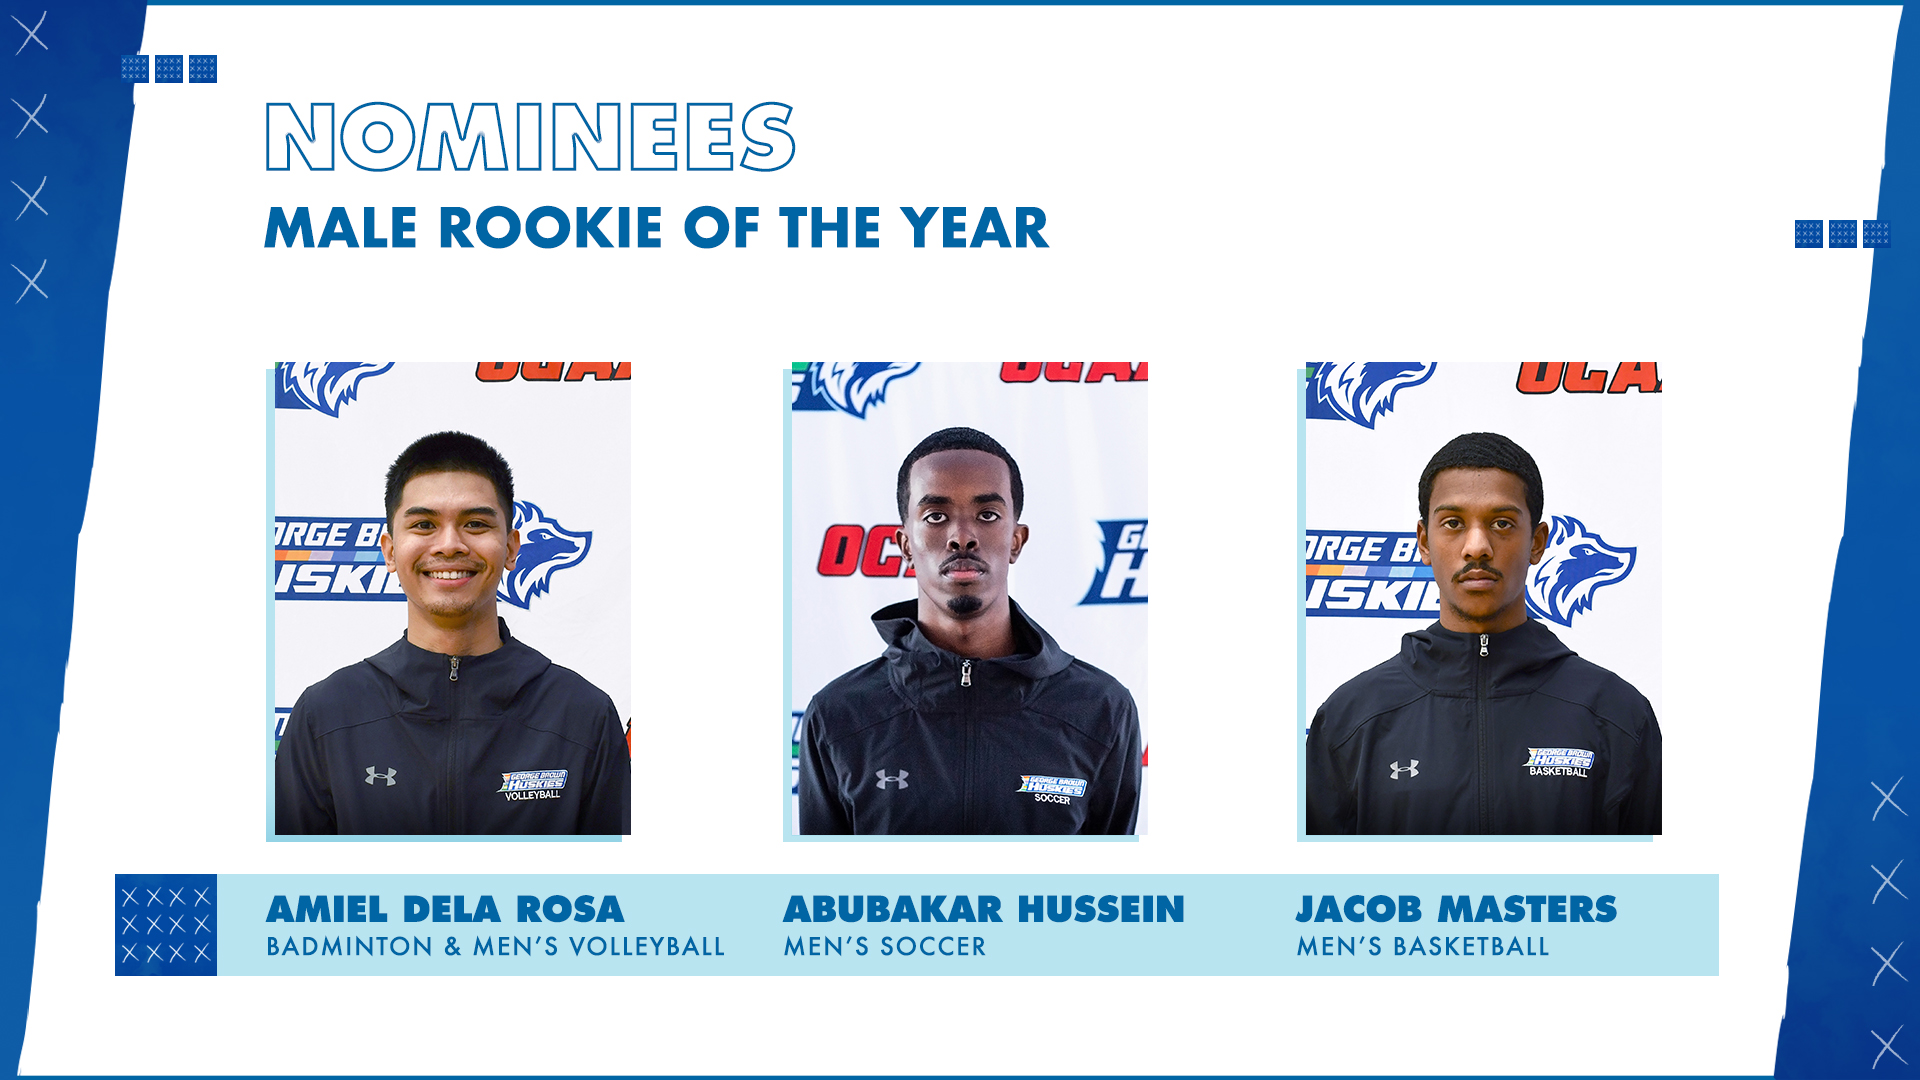 Nominees male rookie of the year amiel dela rosabadminton.mens volleyball Abubakar Hussein menssoccer JacobMasters mens basketball